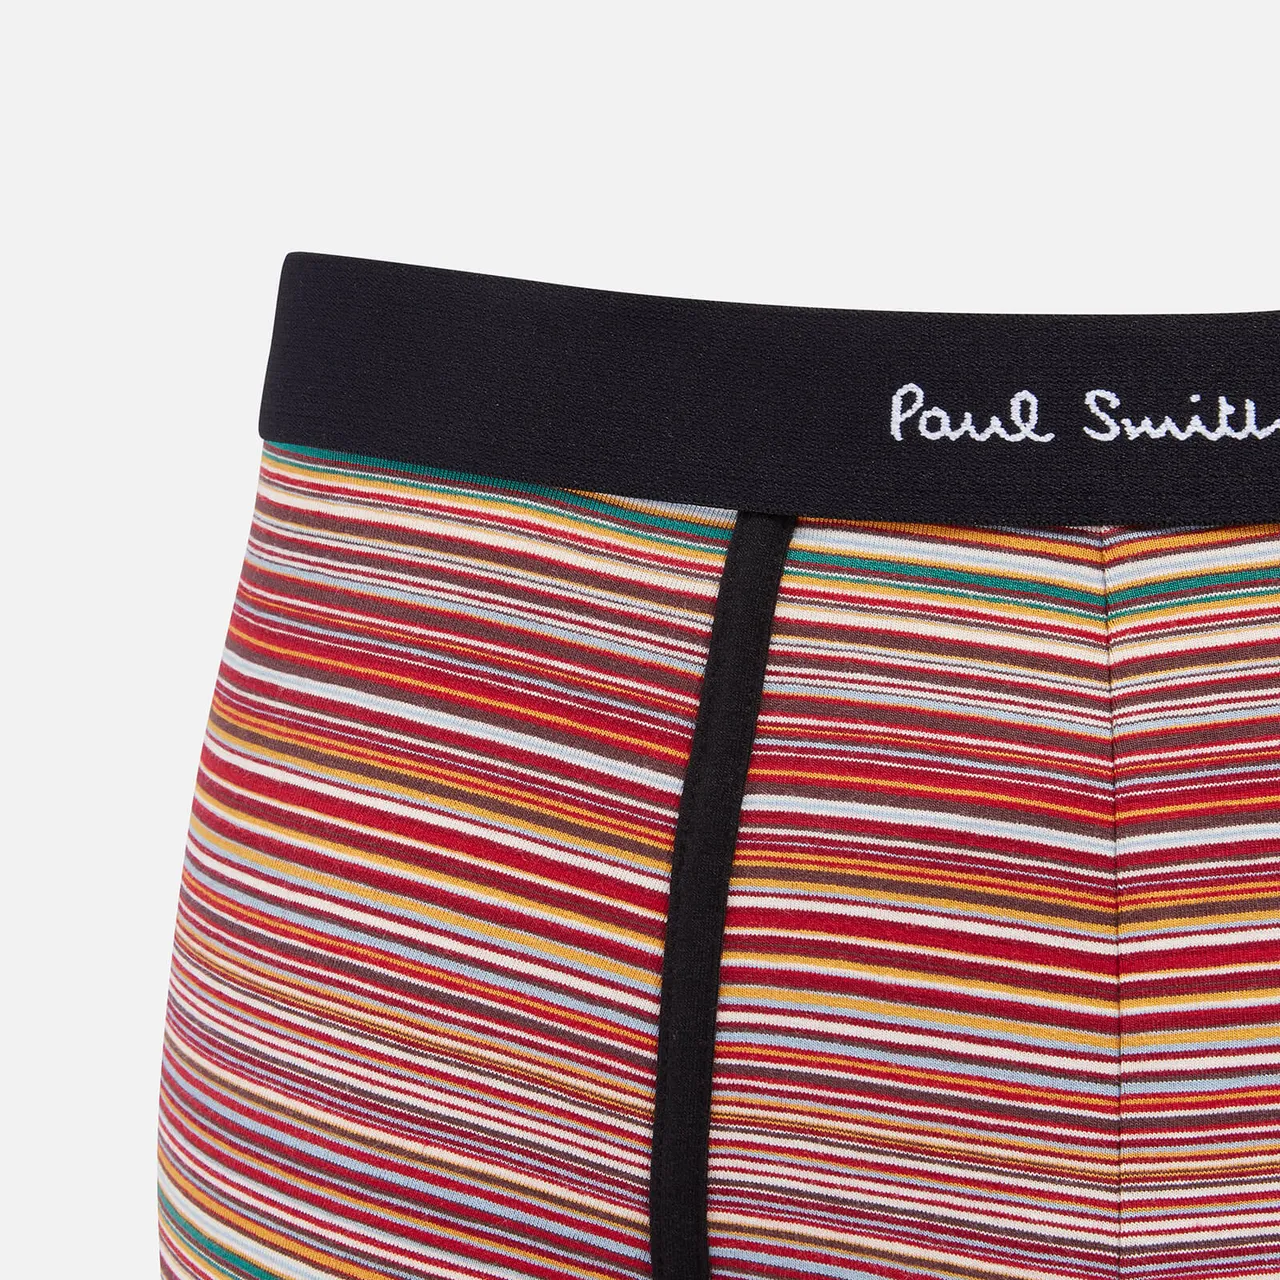 PS Paul Smith Three-Pack Organic Cotton-Blend Boxer Shorts